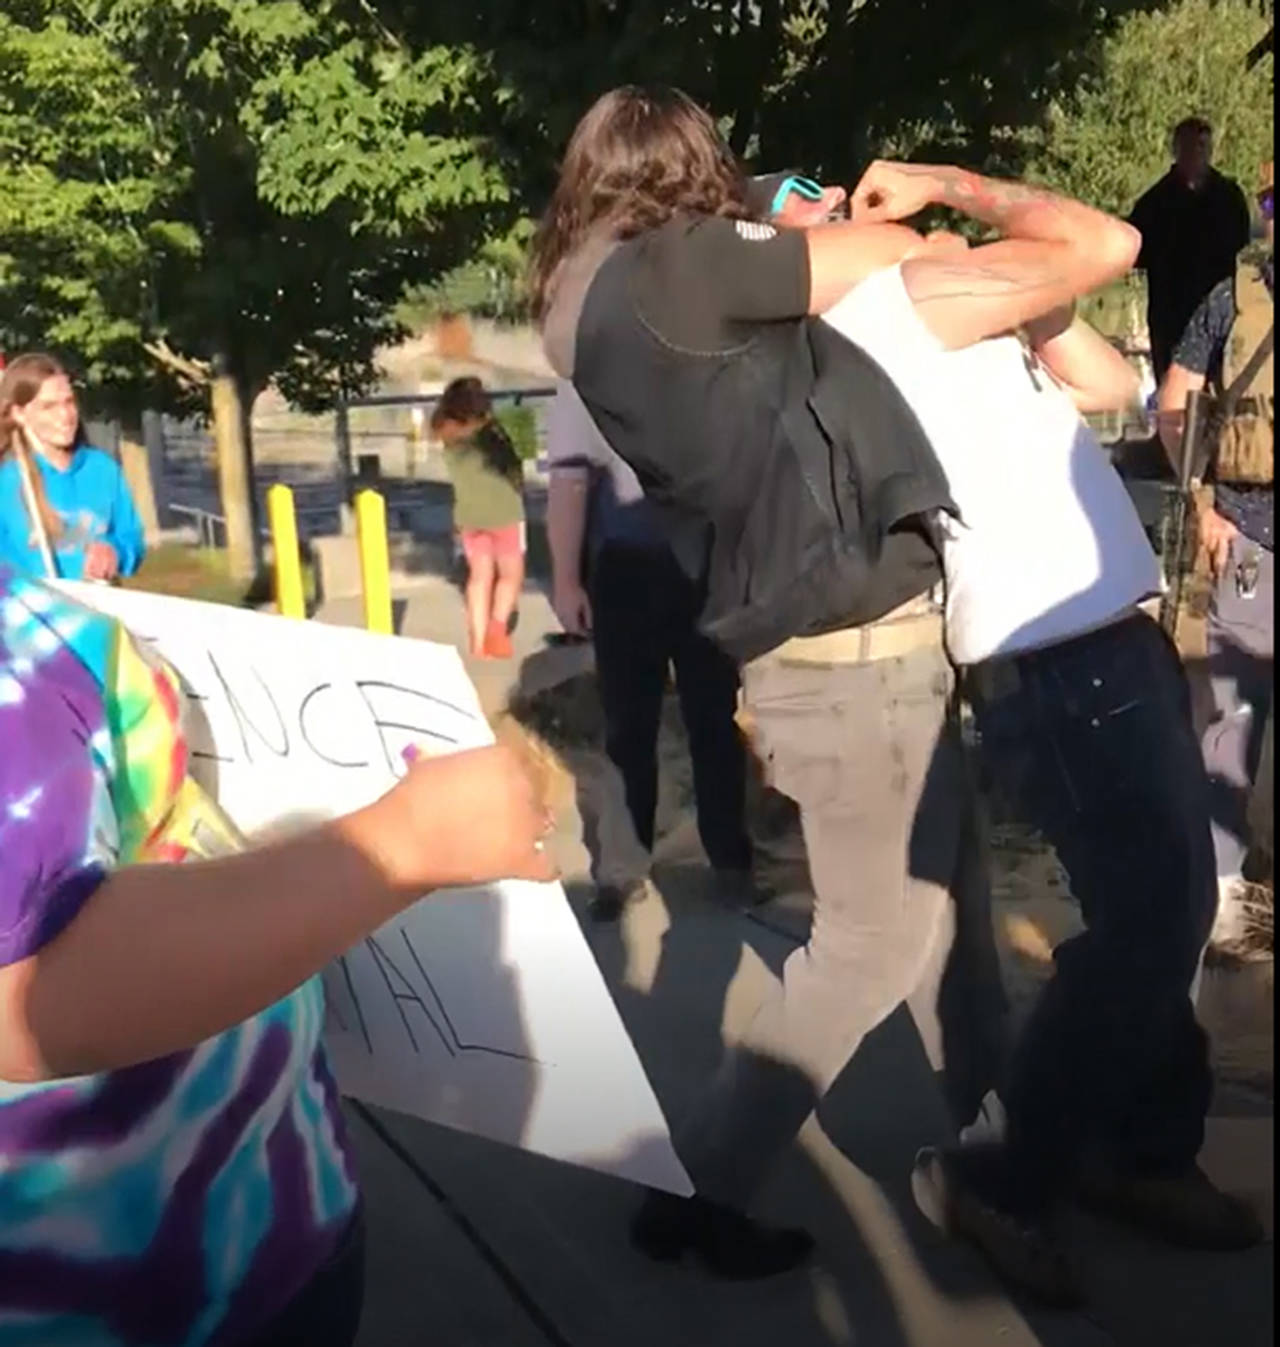 An unidentified man was seen wrapping his arm around a counter-protester and dragging him at the Back the Blue rally in Everett (Screen grab from video courtesy of Ami McCuaig)